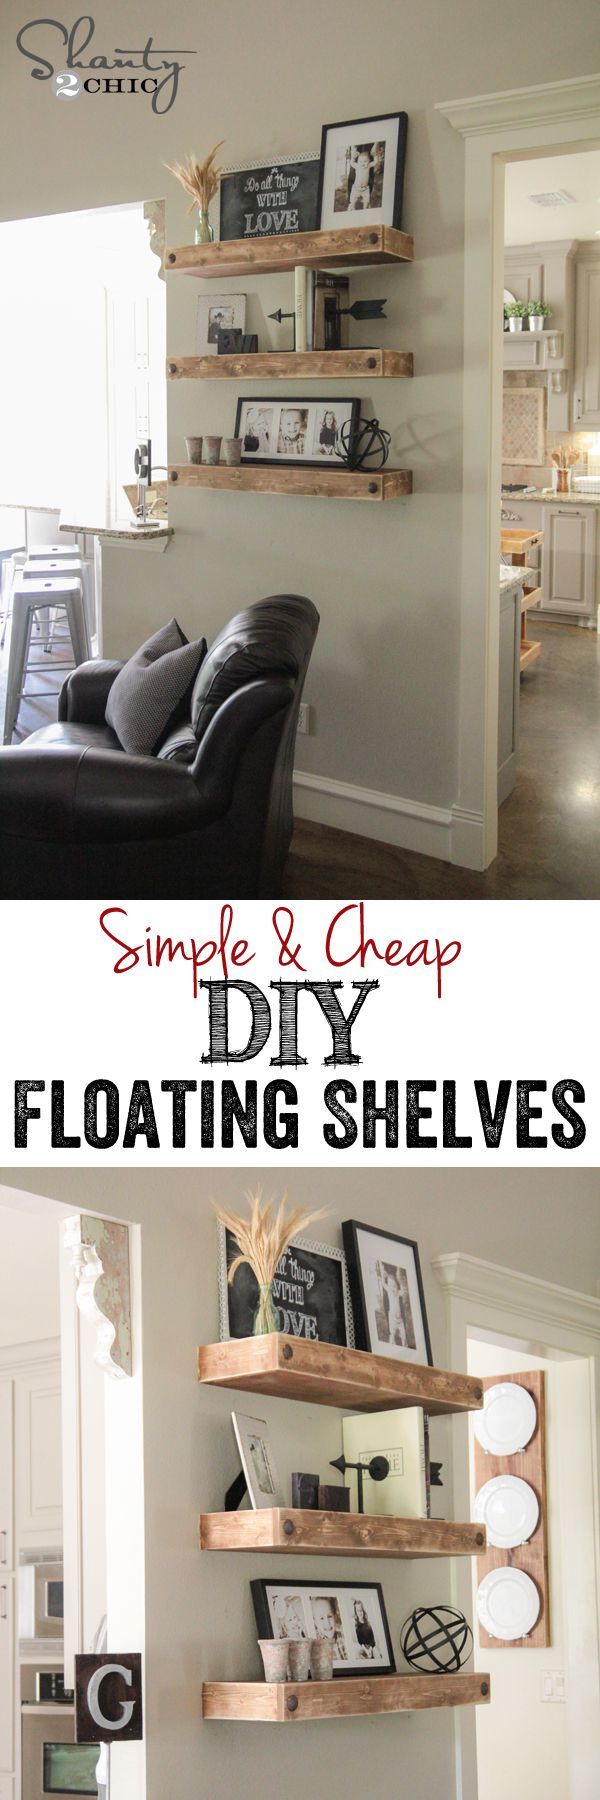 Simple & Cheap DIY Floating Shelves! FREE plans and tutorial at Shanty-2-Chic.com